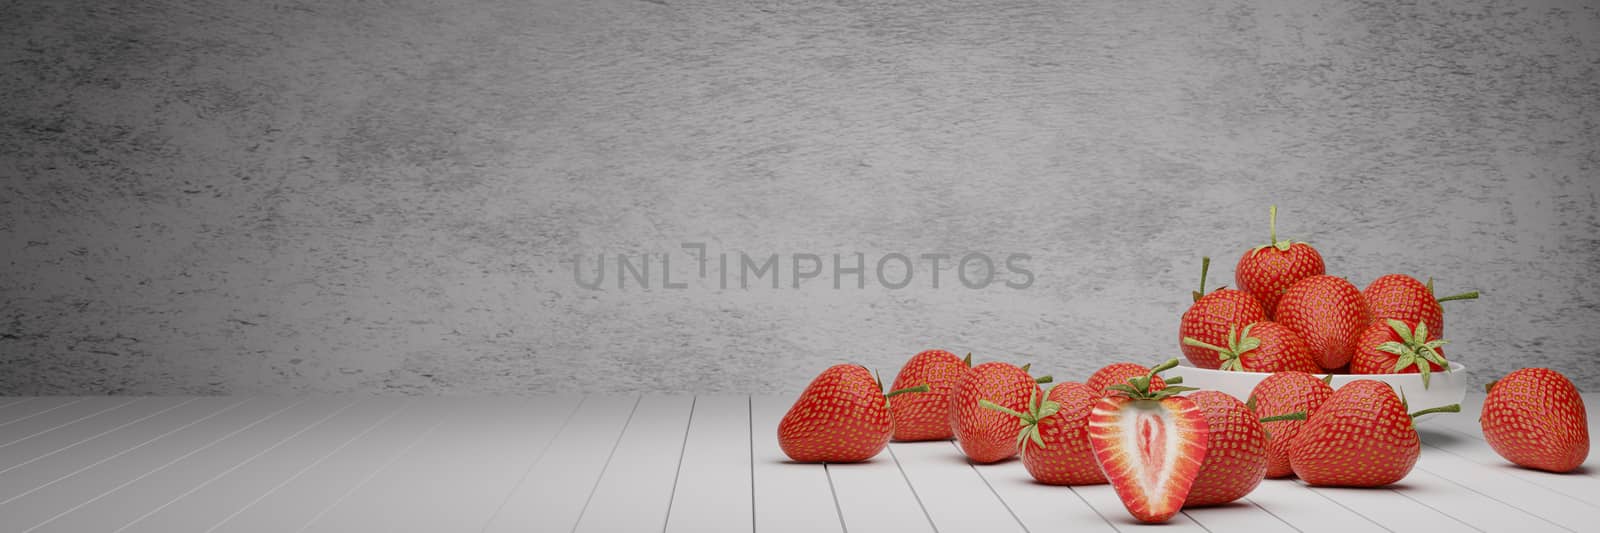 Panorama Many fresh strawberries in a white ceramic cup and on a white wooden floor. Strawberries cut in half on a white wooden table. White plaster. 3D Rendering.